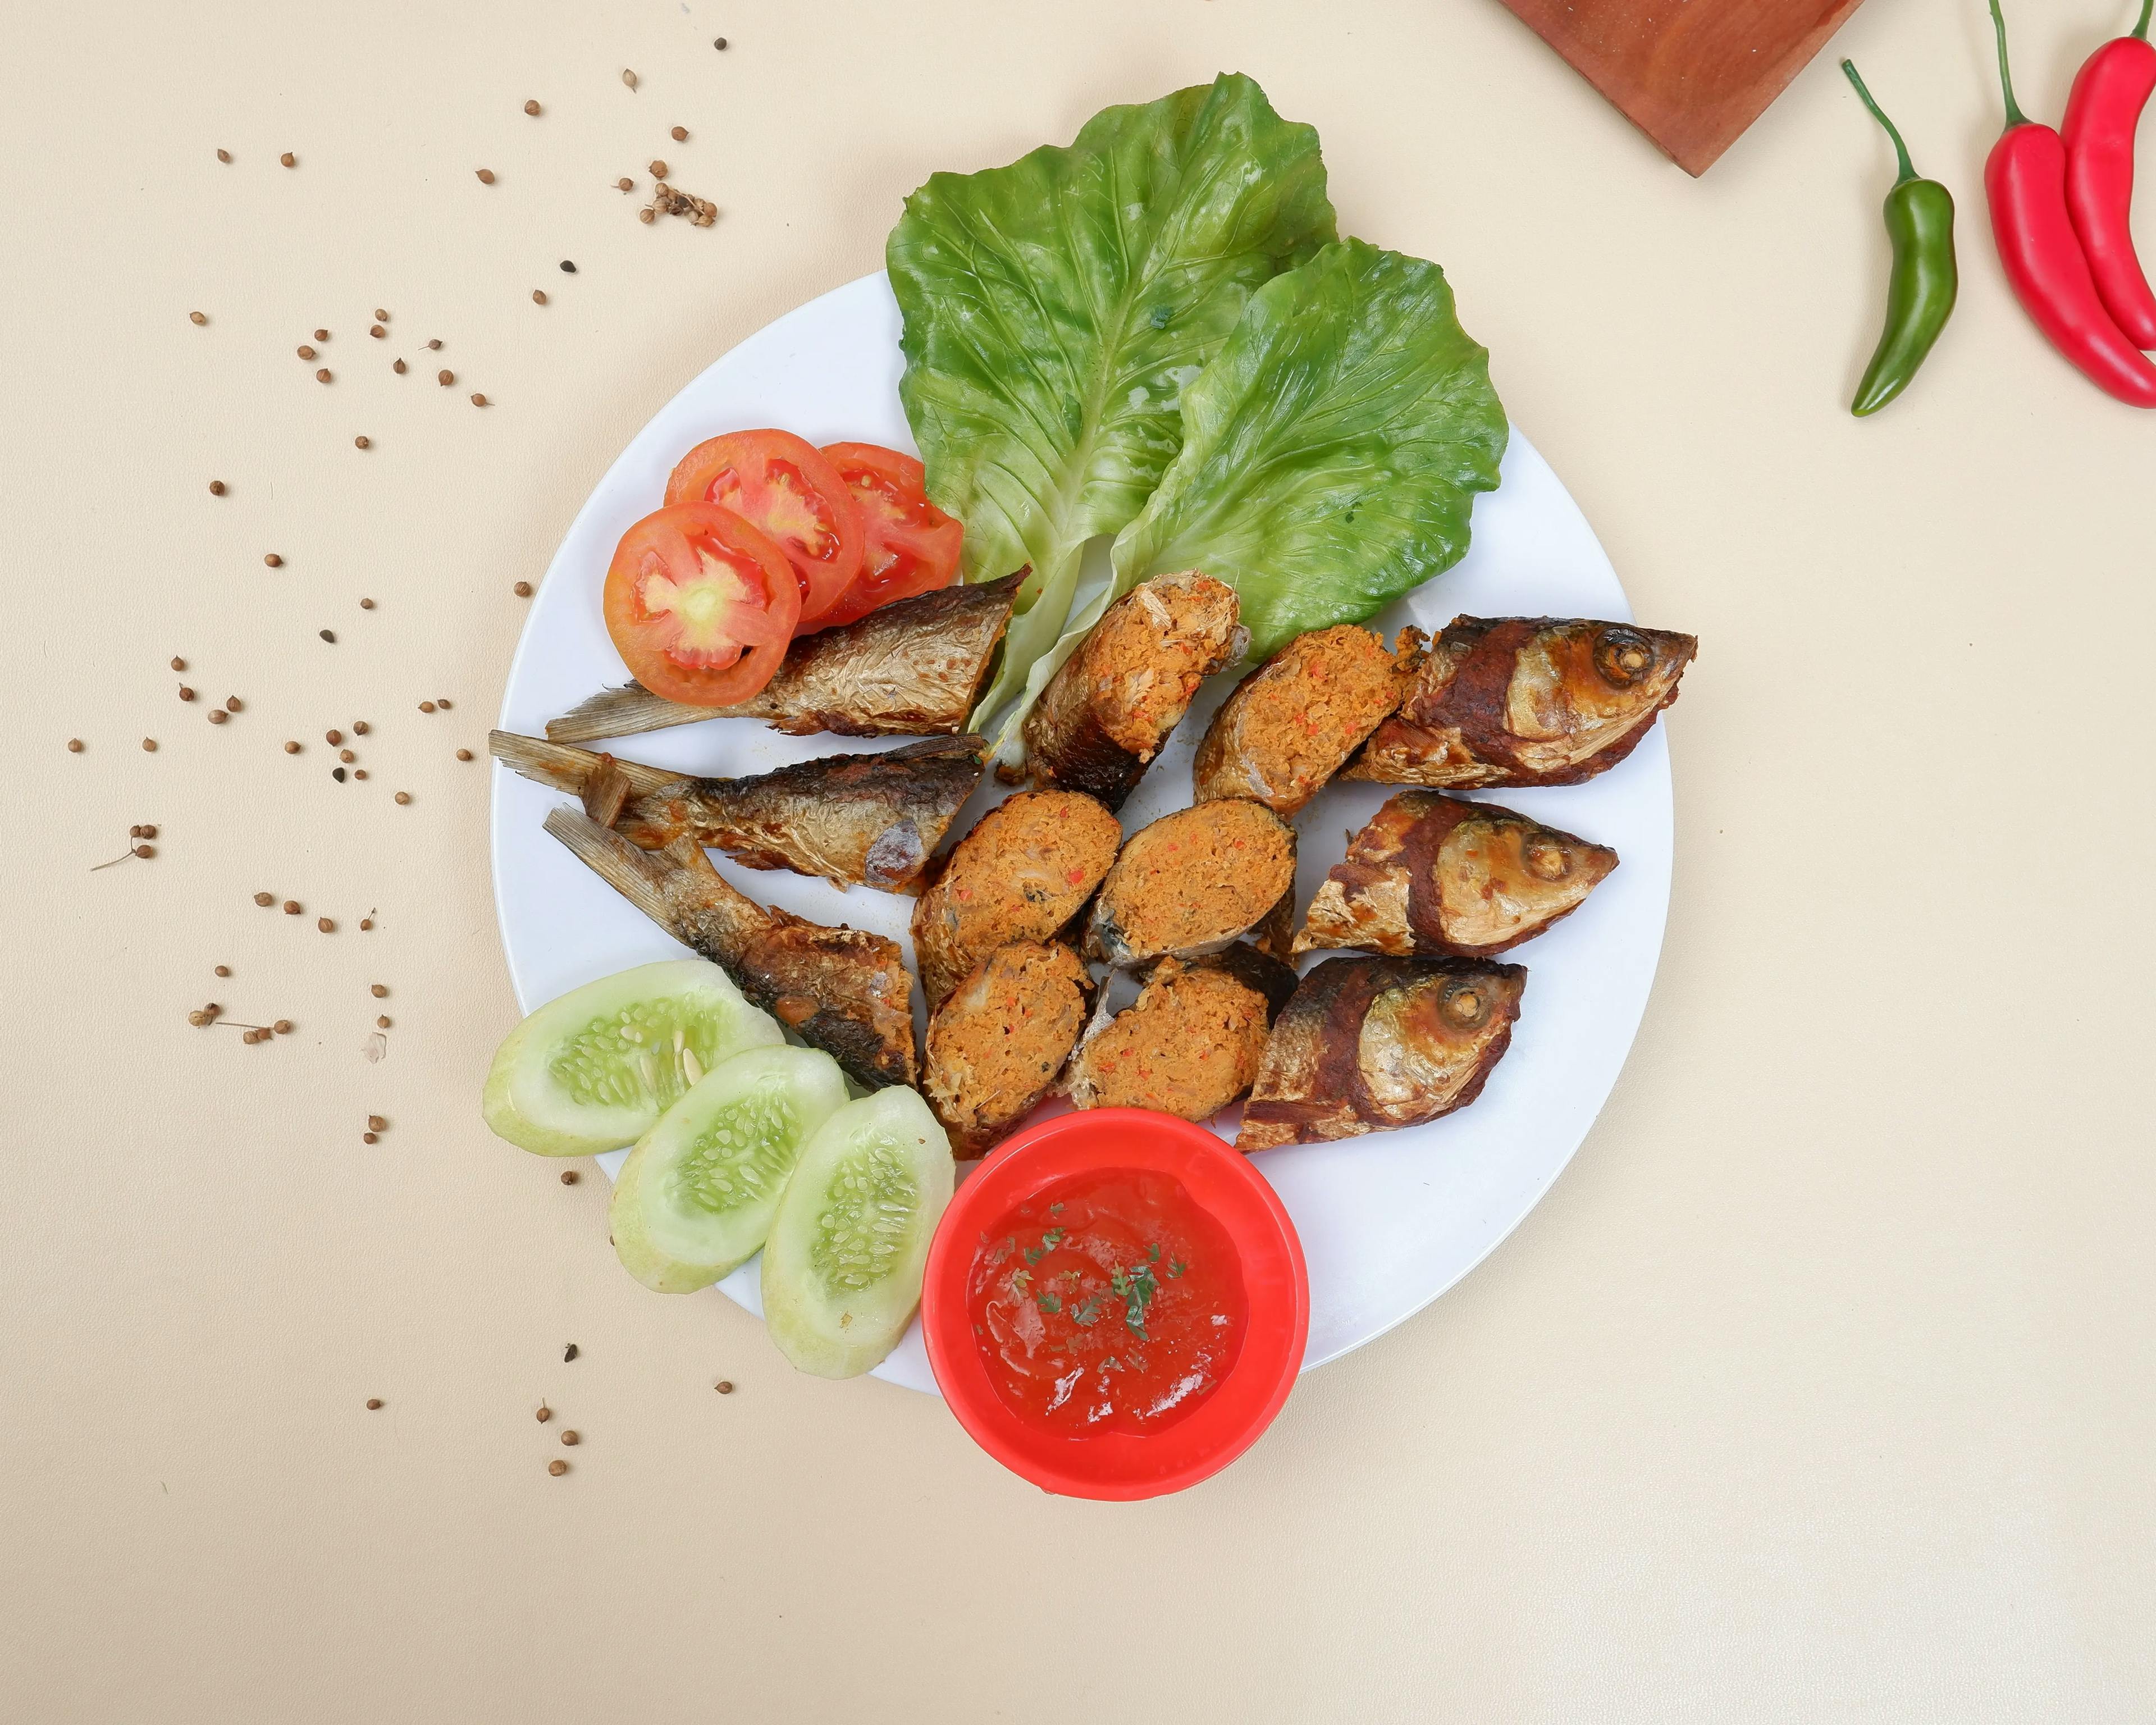 Plate with fish and veggies from the Nusantara Indonesian Restaurant